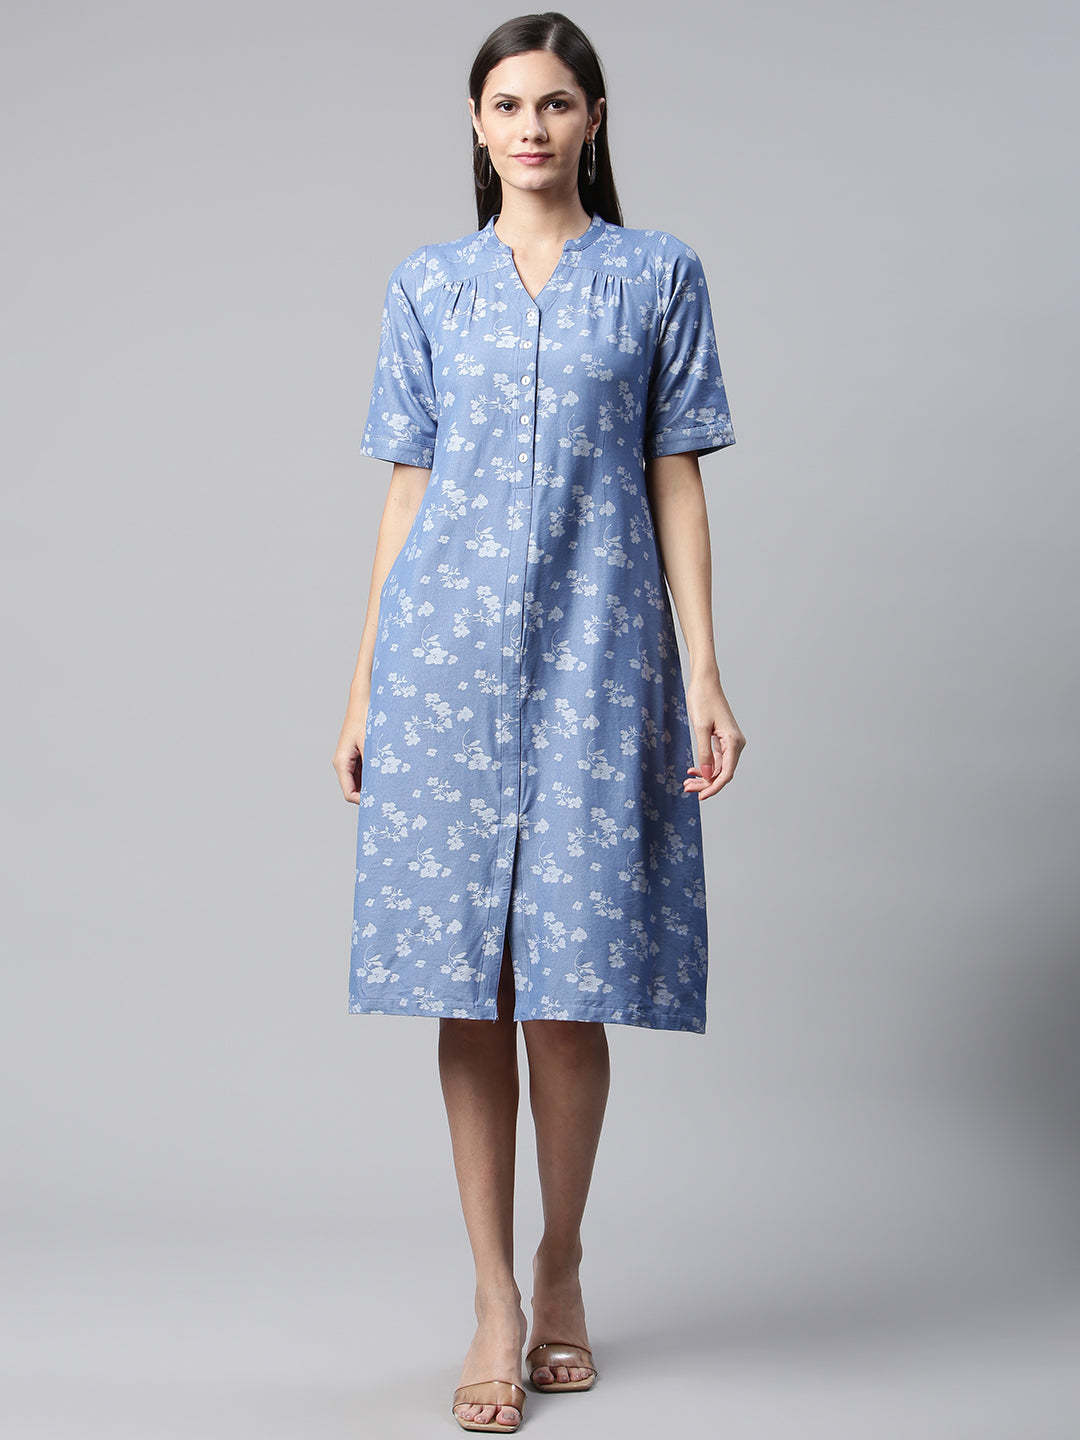 Ayaany Women Blue Stretchable Casual Dress